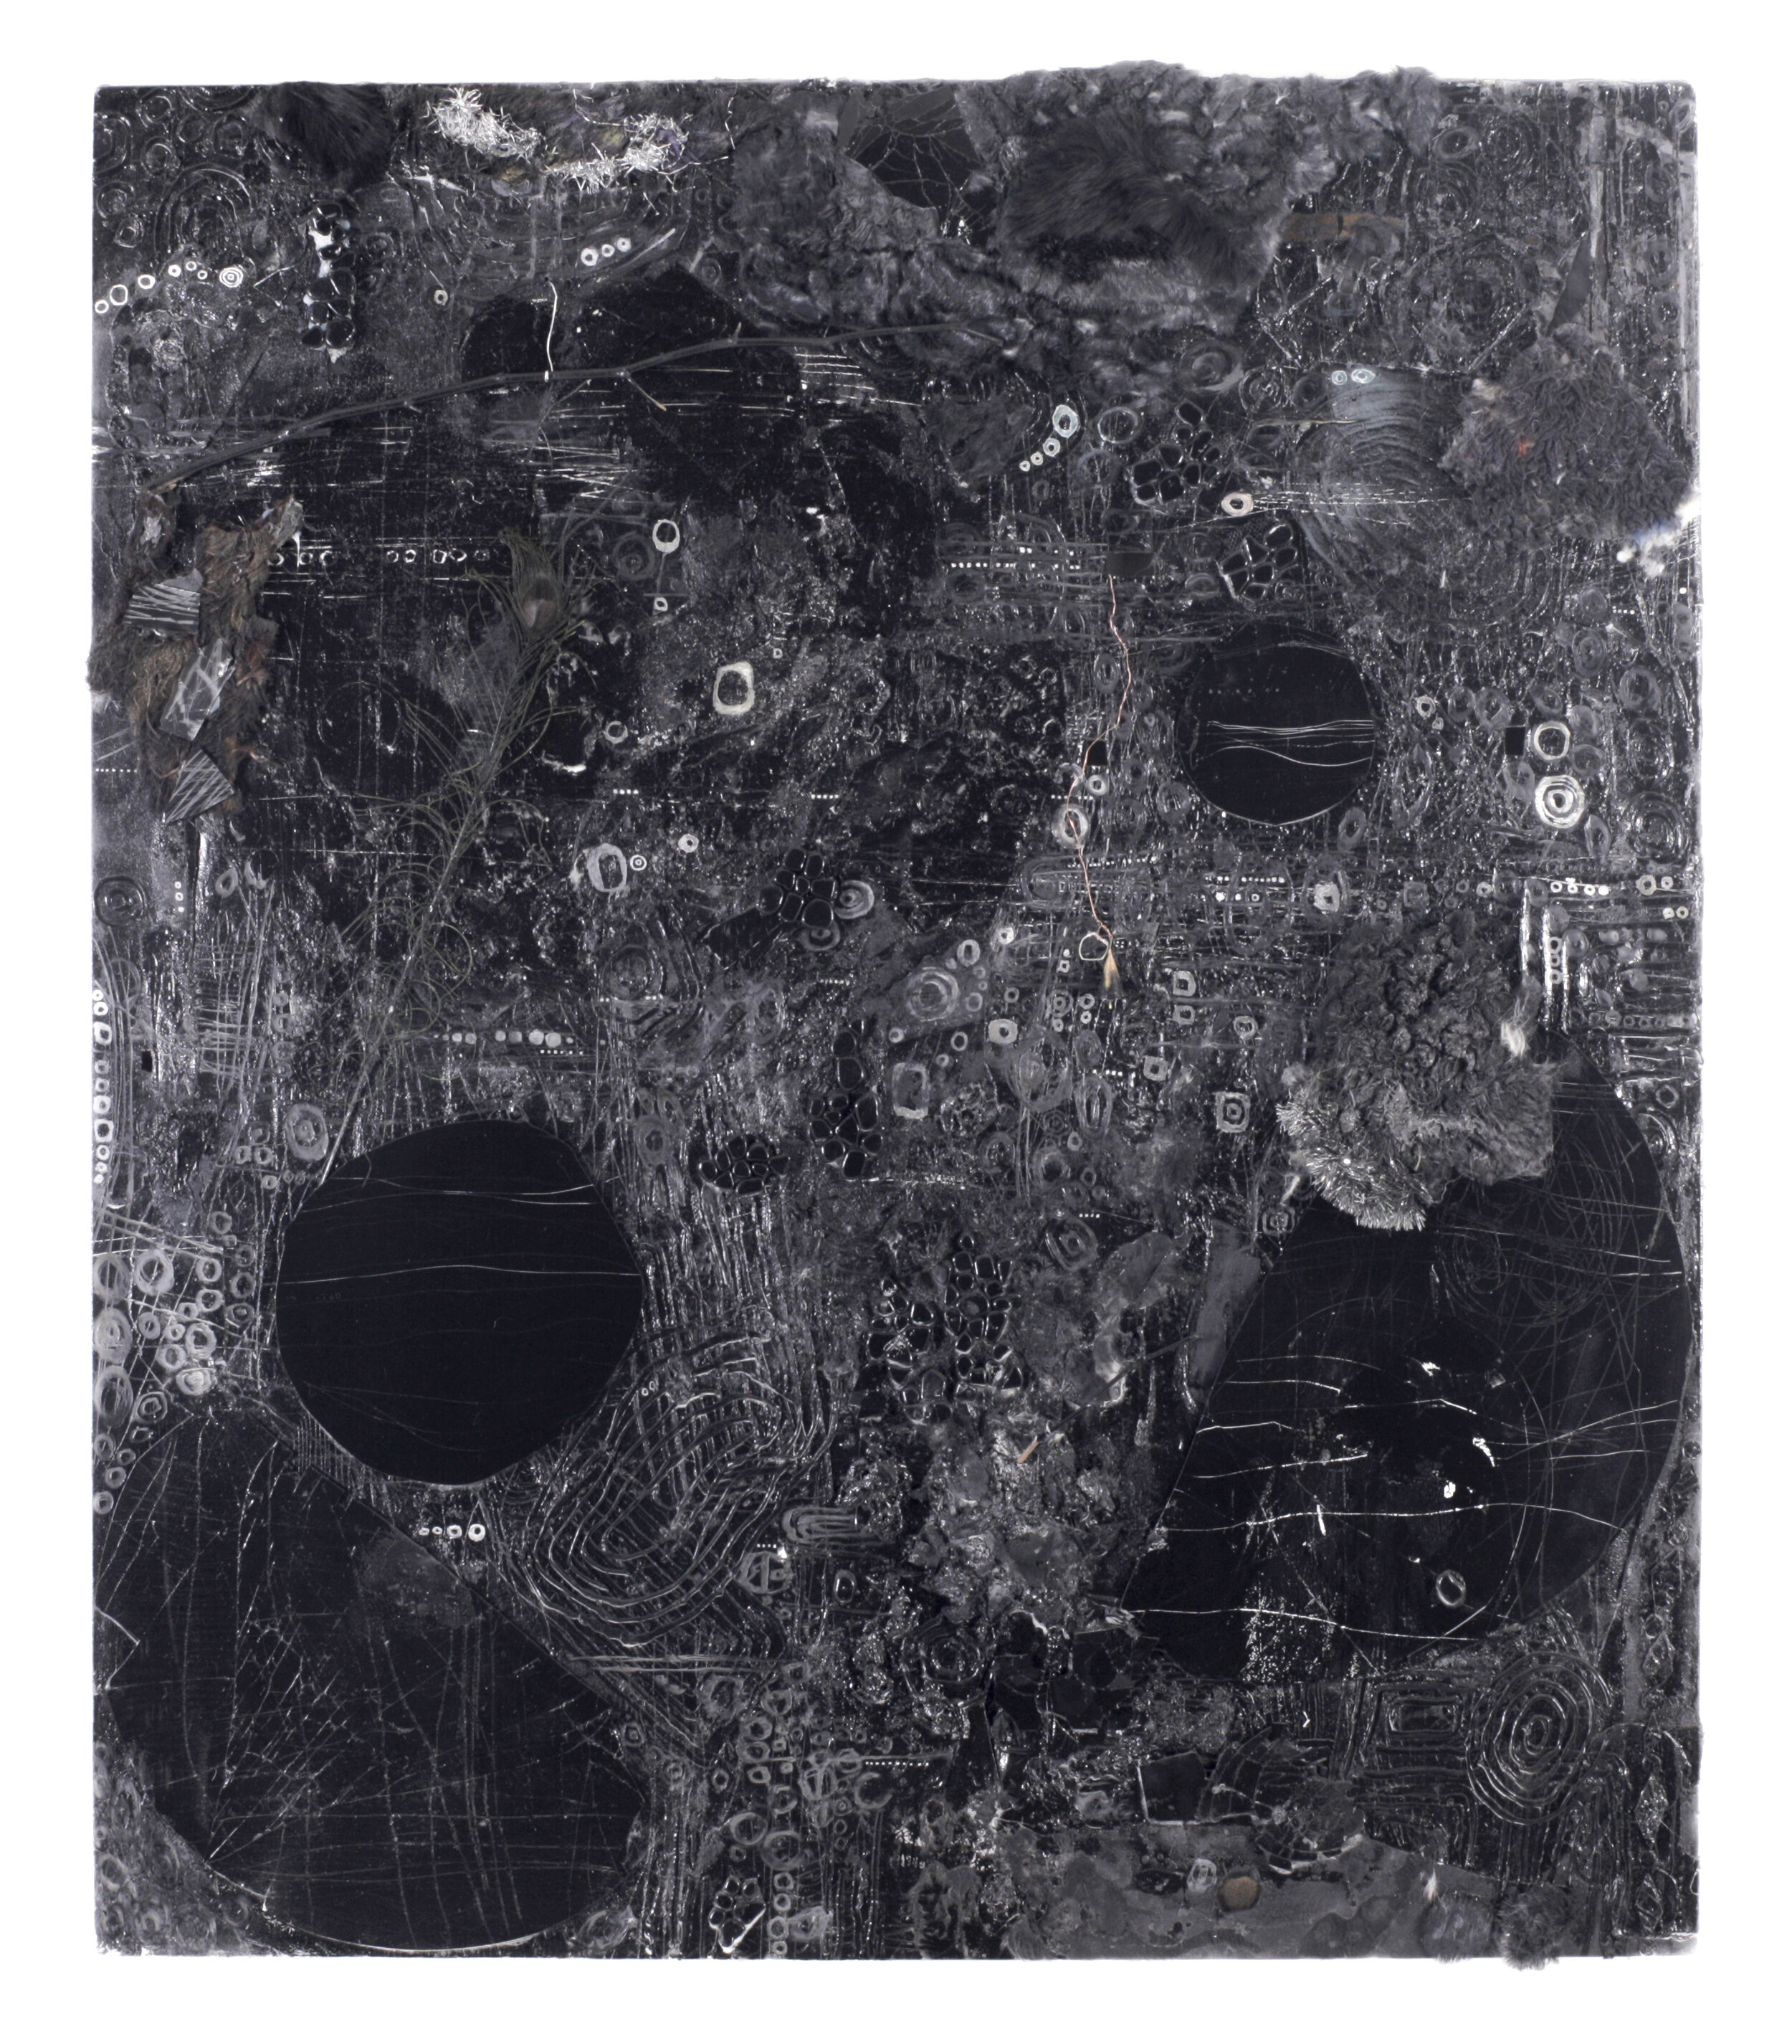 Untitled, 2017 - Adhesive, spray paint, blackened mirror, sticks, fur, bells on canvas. 90 x 80 inches